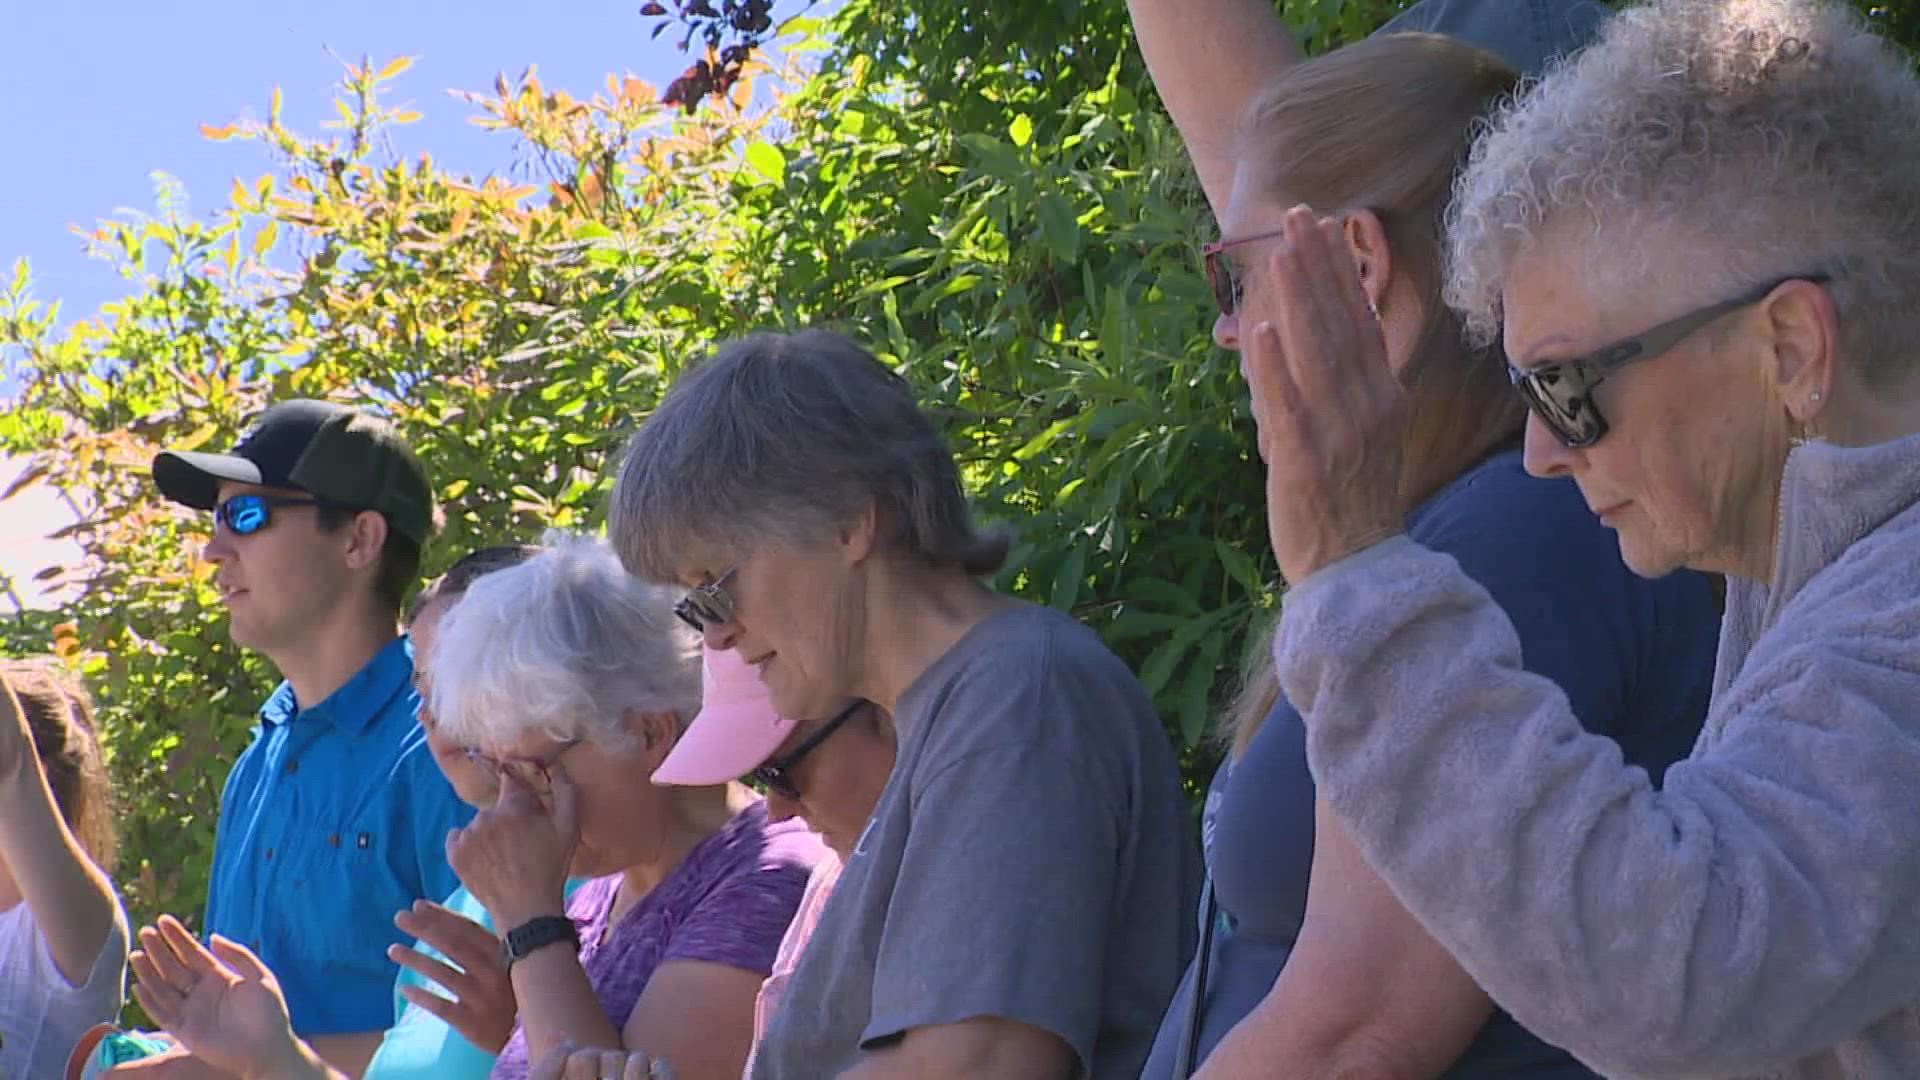 Activists gathered for a previously planned prayer vigil outside an Everett Planned Parenthood.